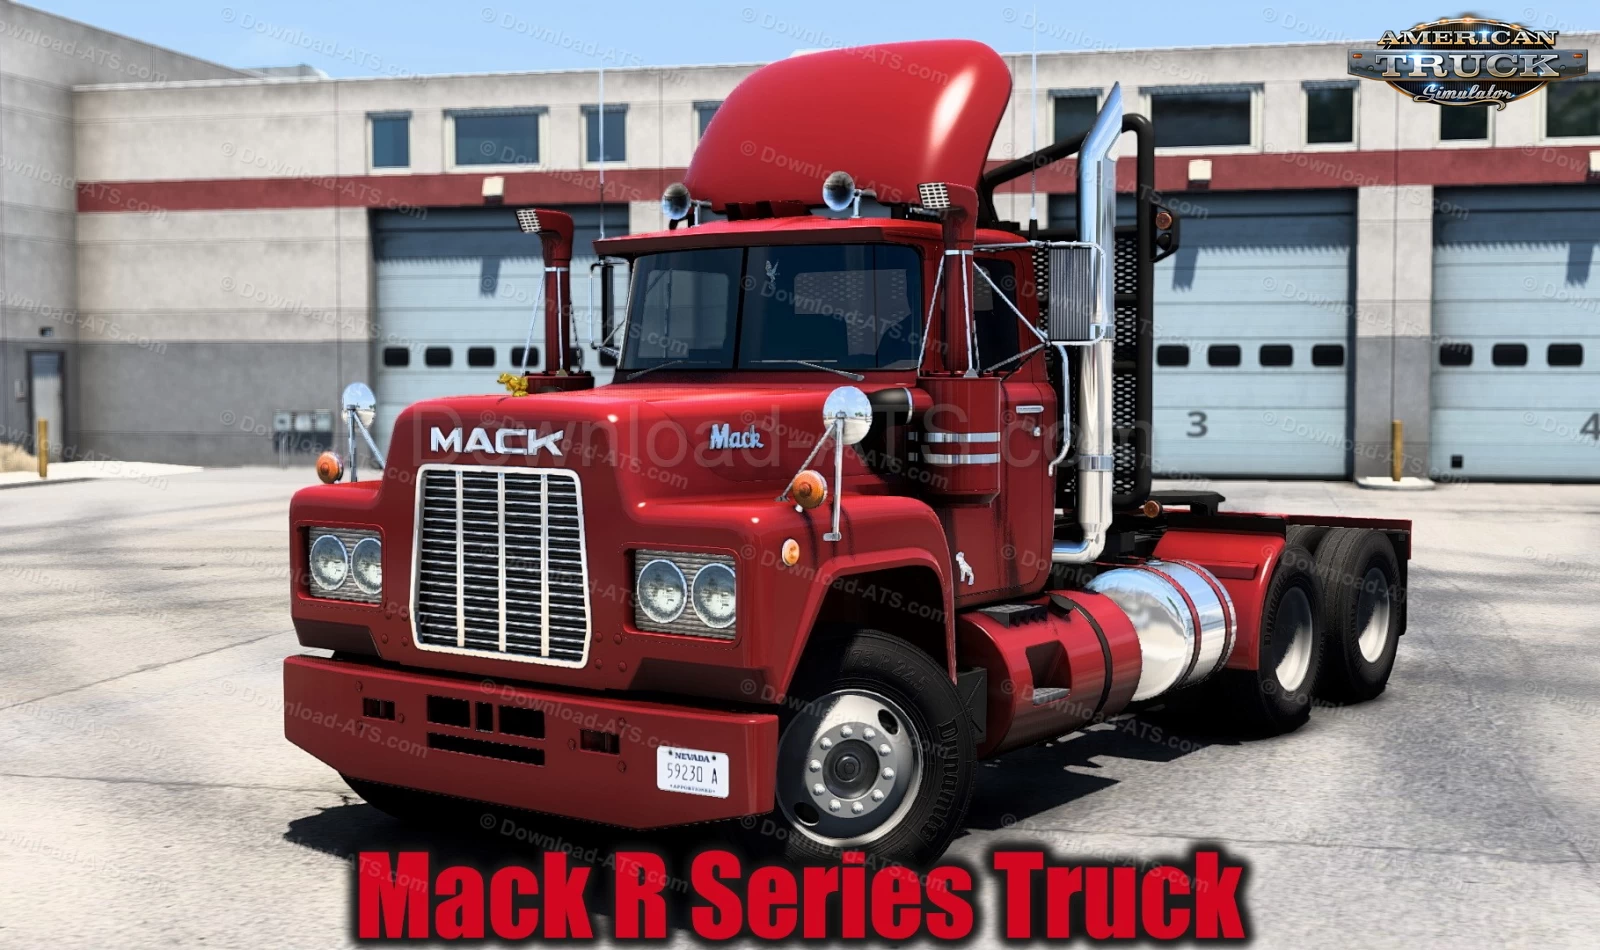 Mack R Series Truck v2.5 by Harven (1.47.x) for ATS